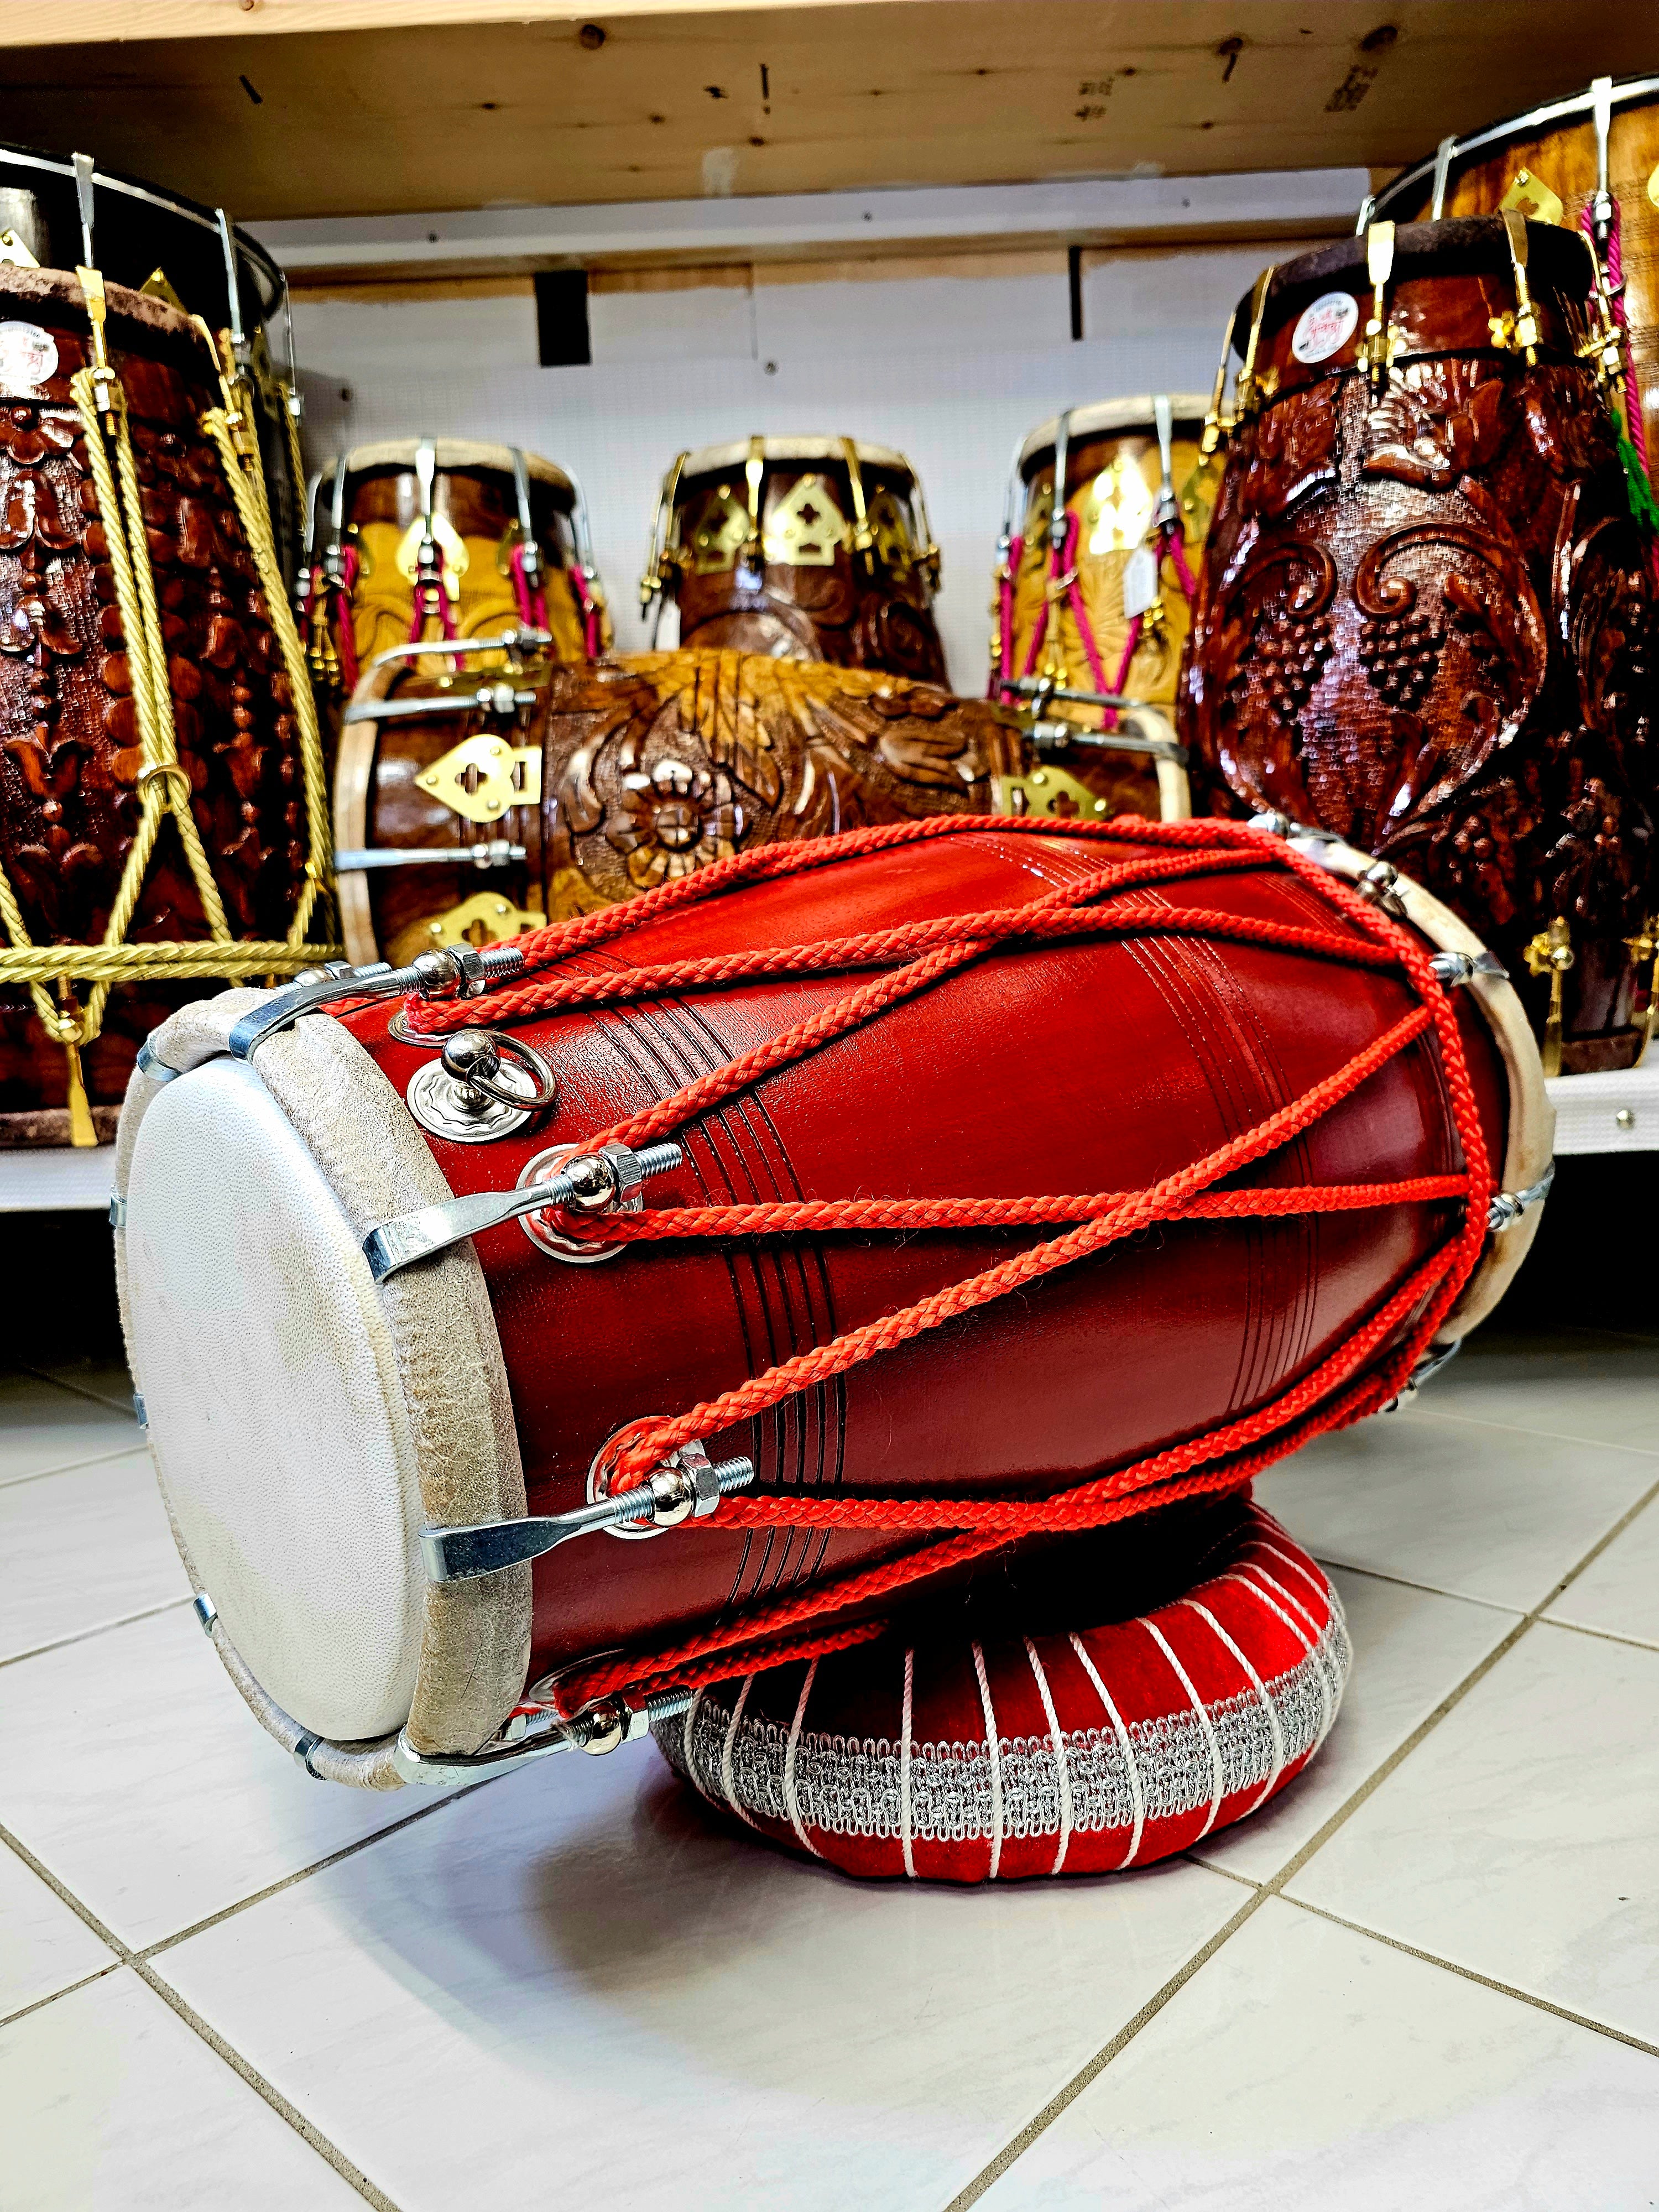 The Ruby Rhythms Pro Dholak - A Red Professional Mango Wood Dholak with Red Ropes Design and Chrome Bolts!